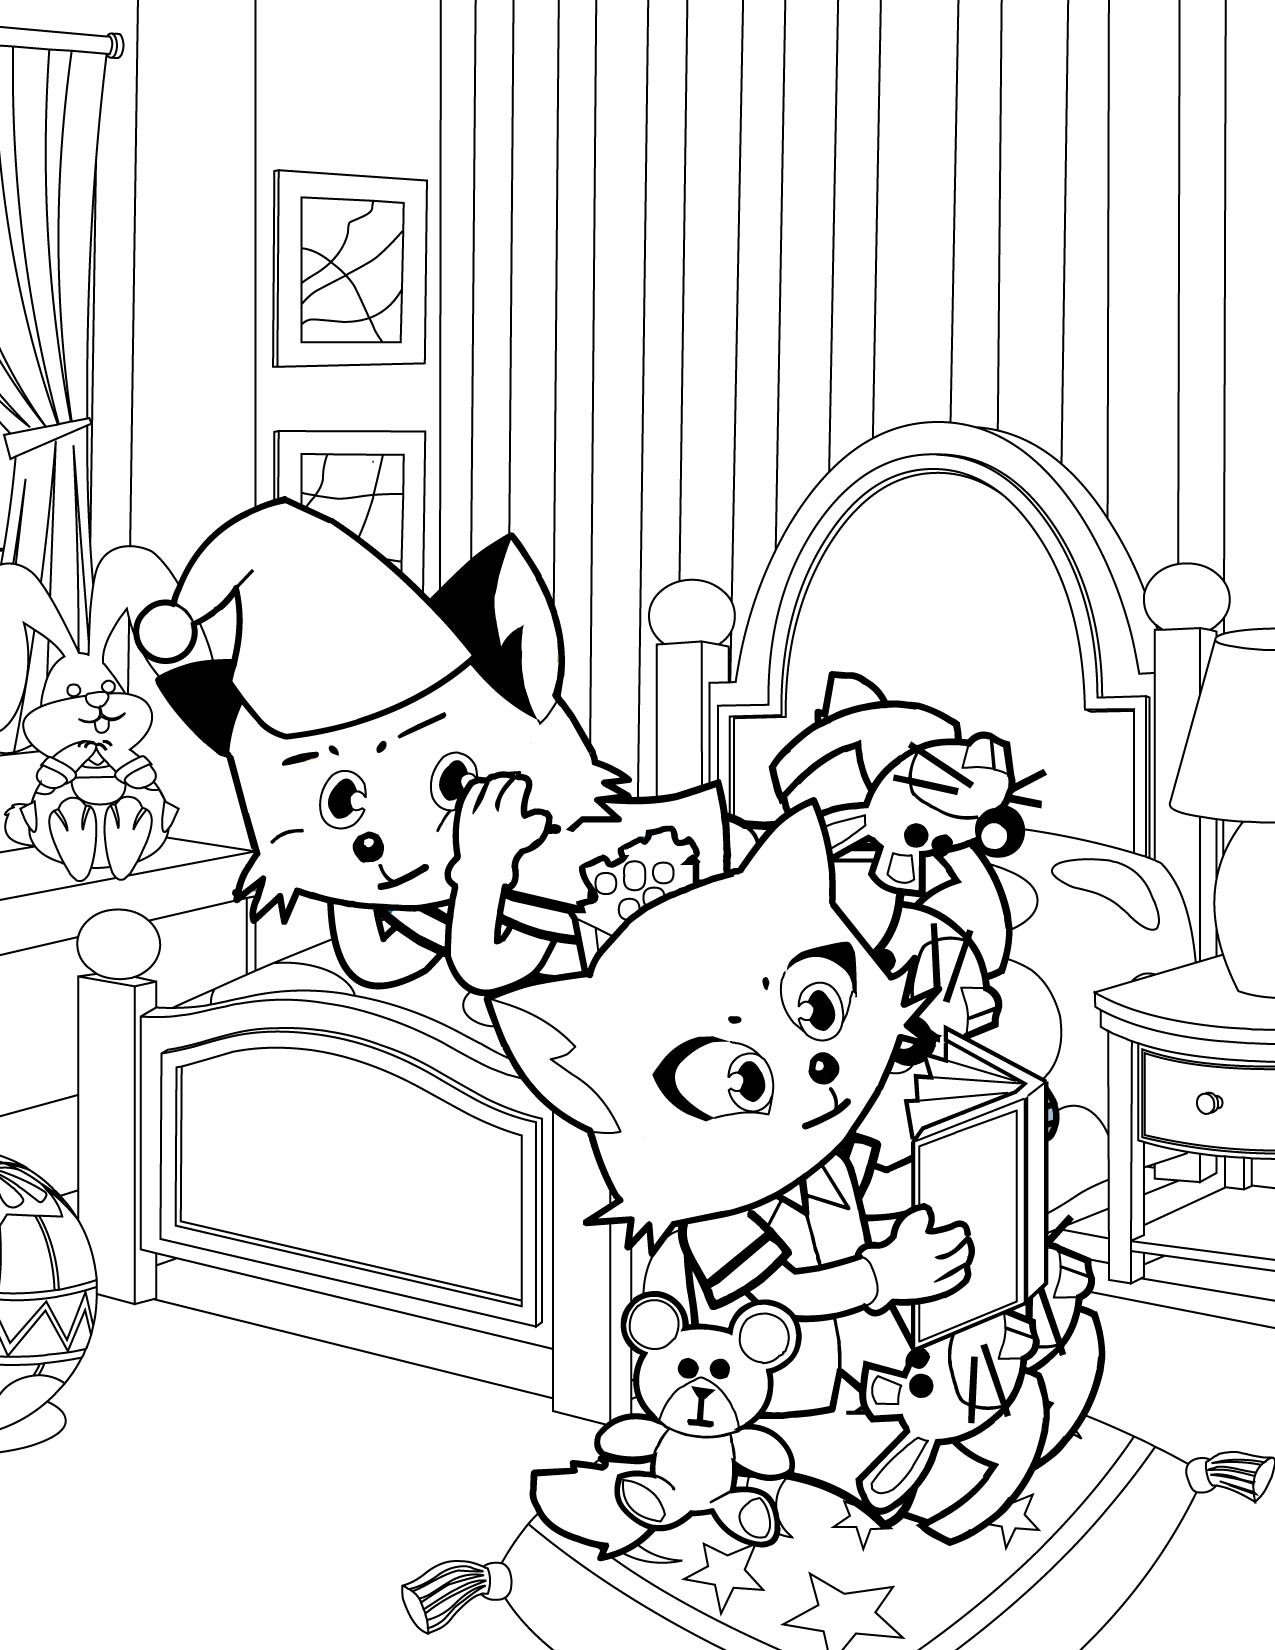 pajama-day-coloring-pages